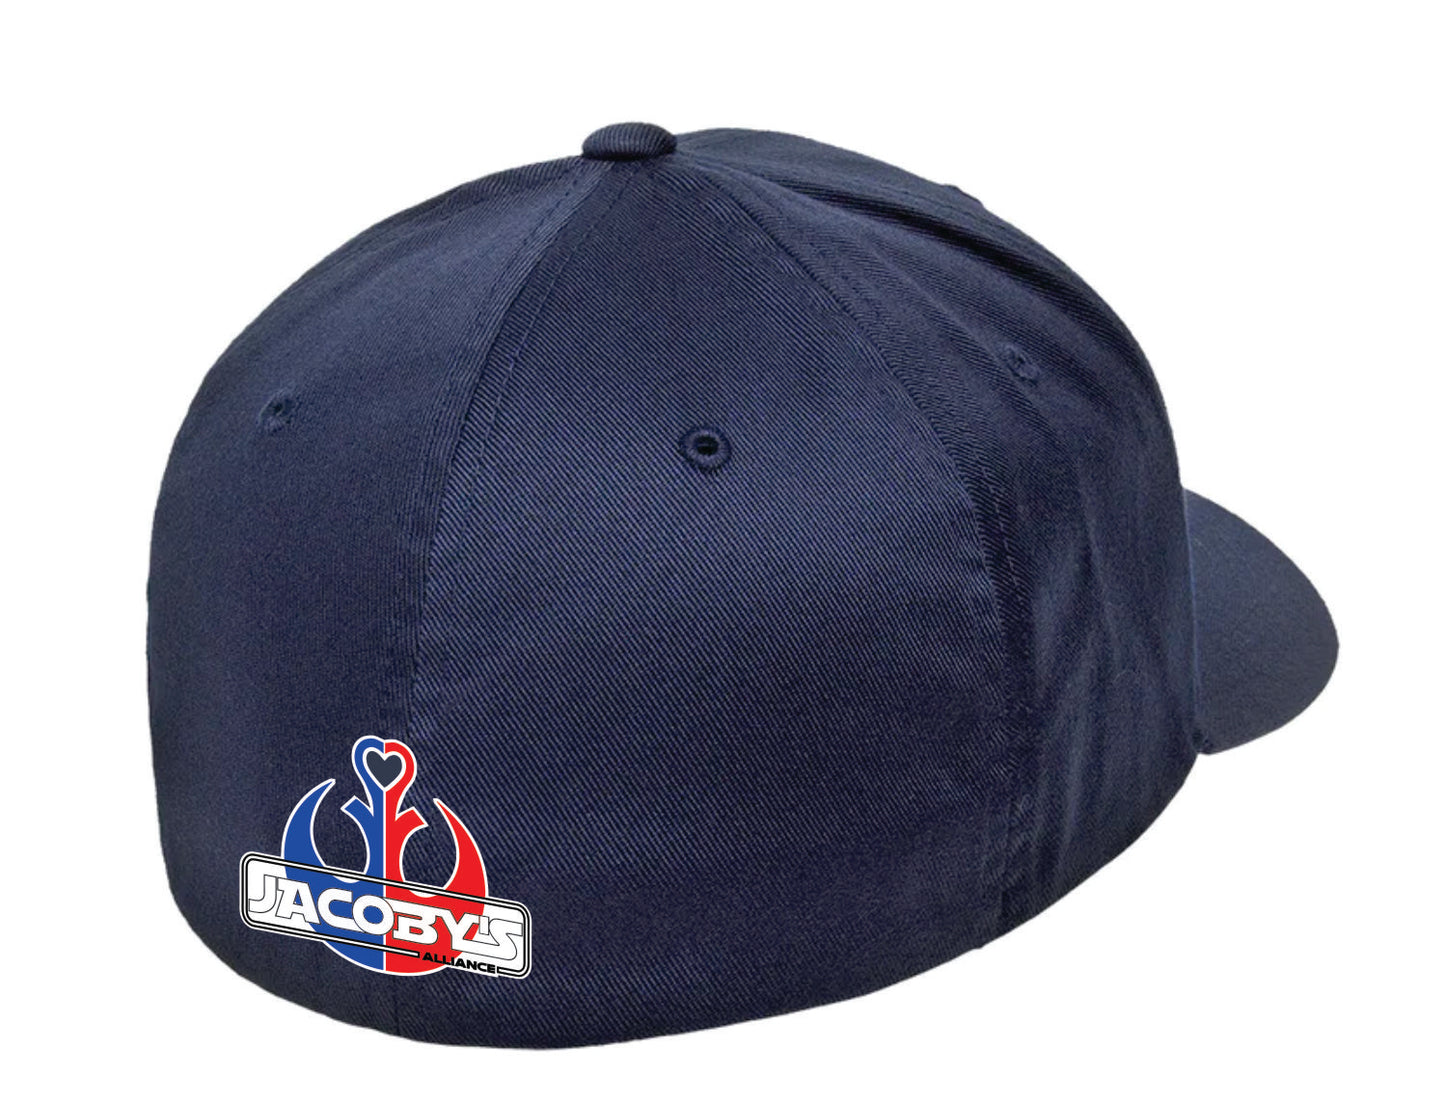 Hey Man/Jacoby's Alliance Combo Hat